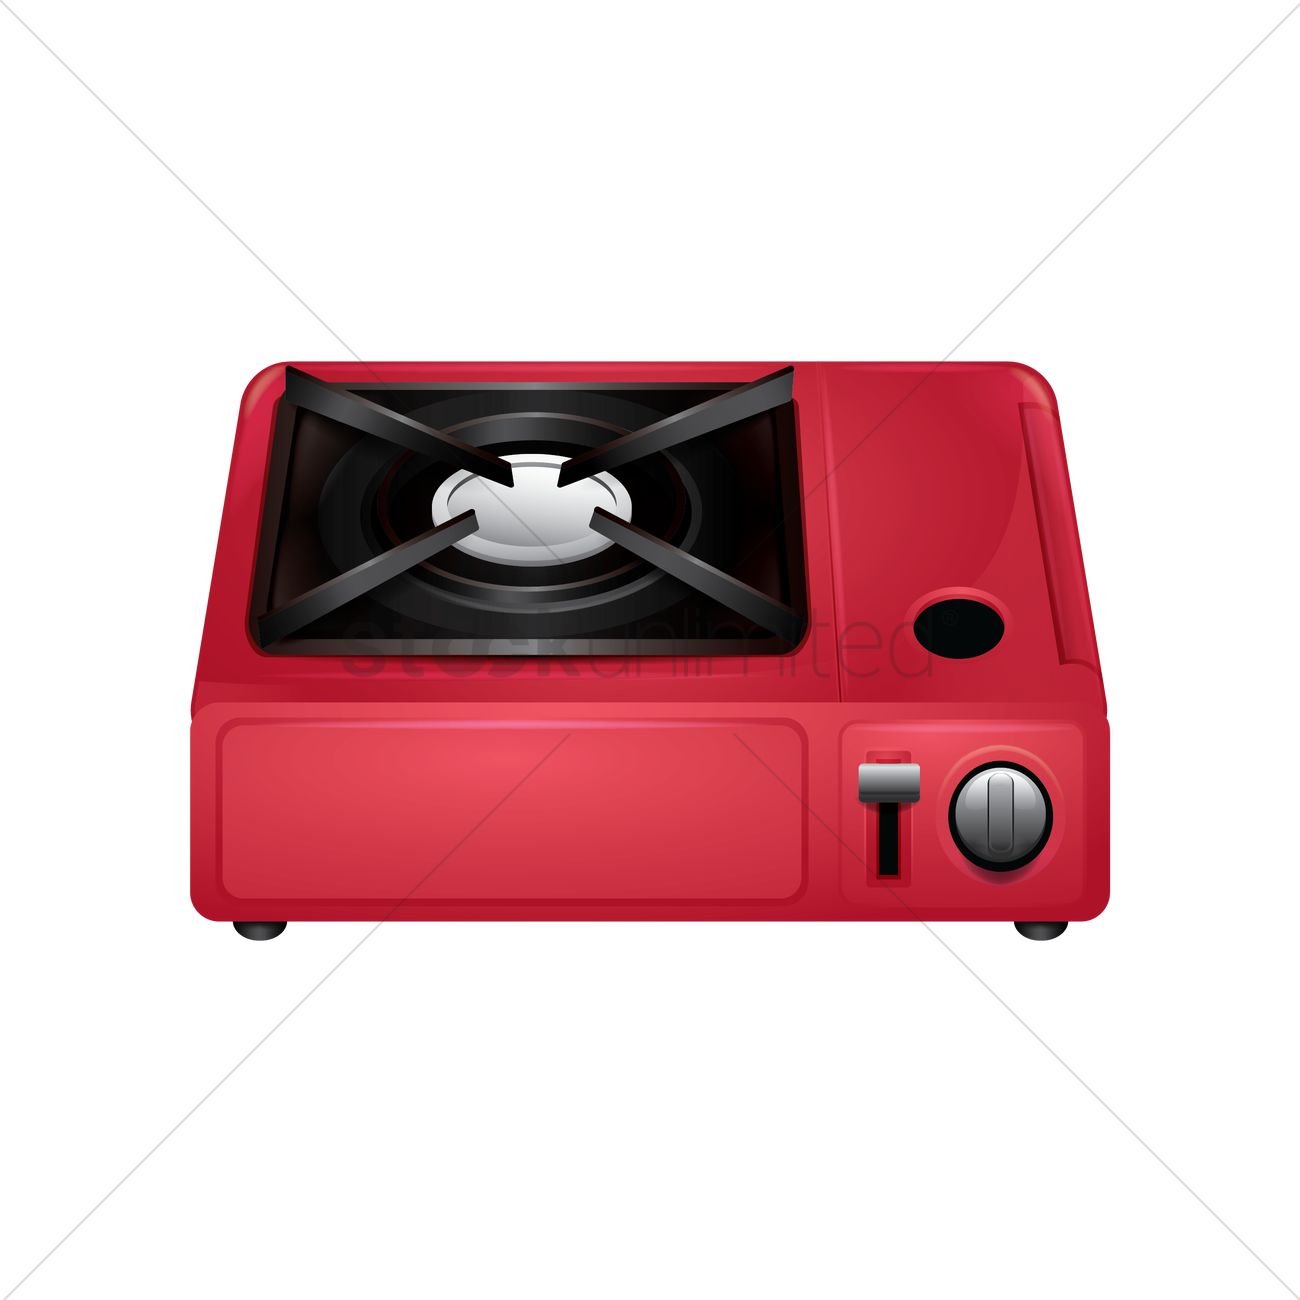 Gas stove clipart - Clipground